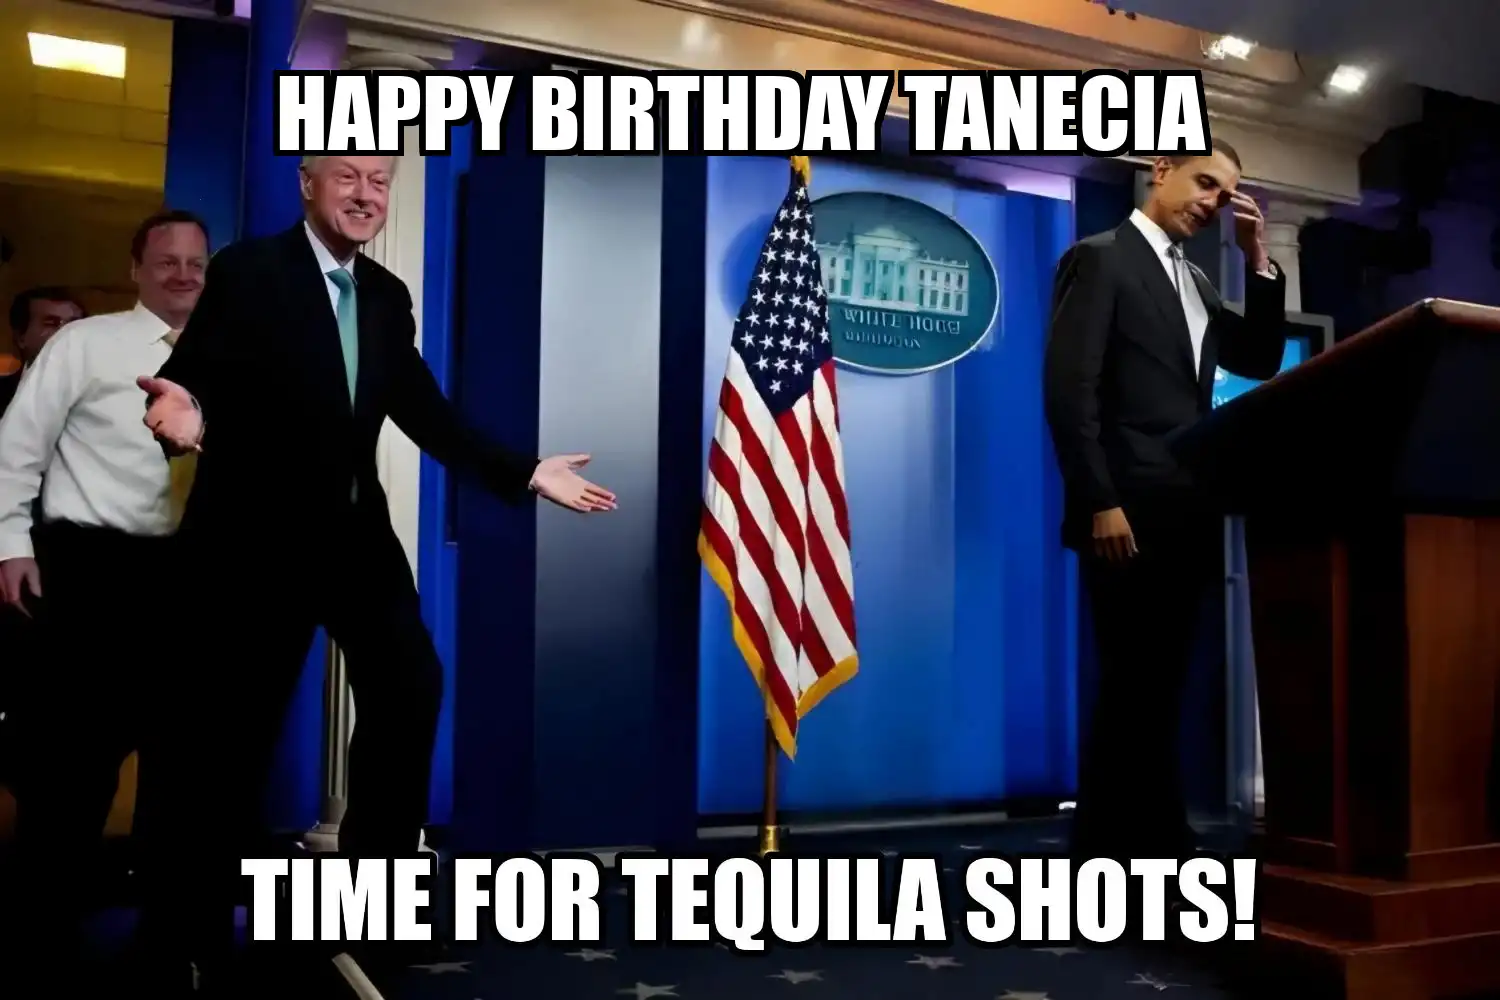 Happy Birthday Tanecia Time For Tequila Shots Memes